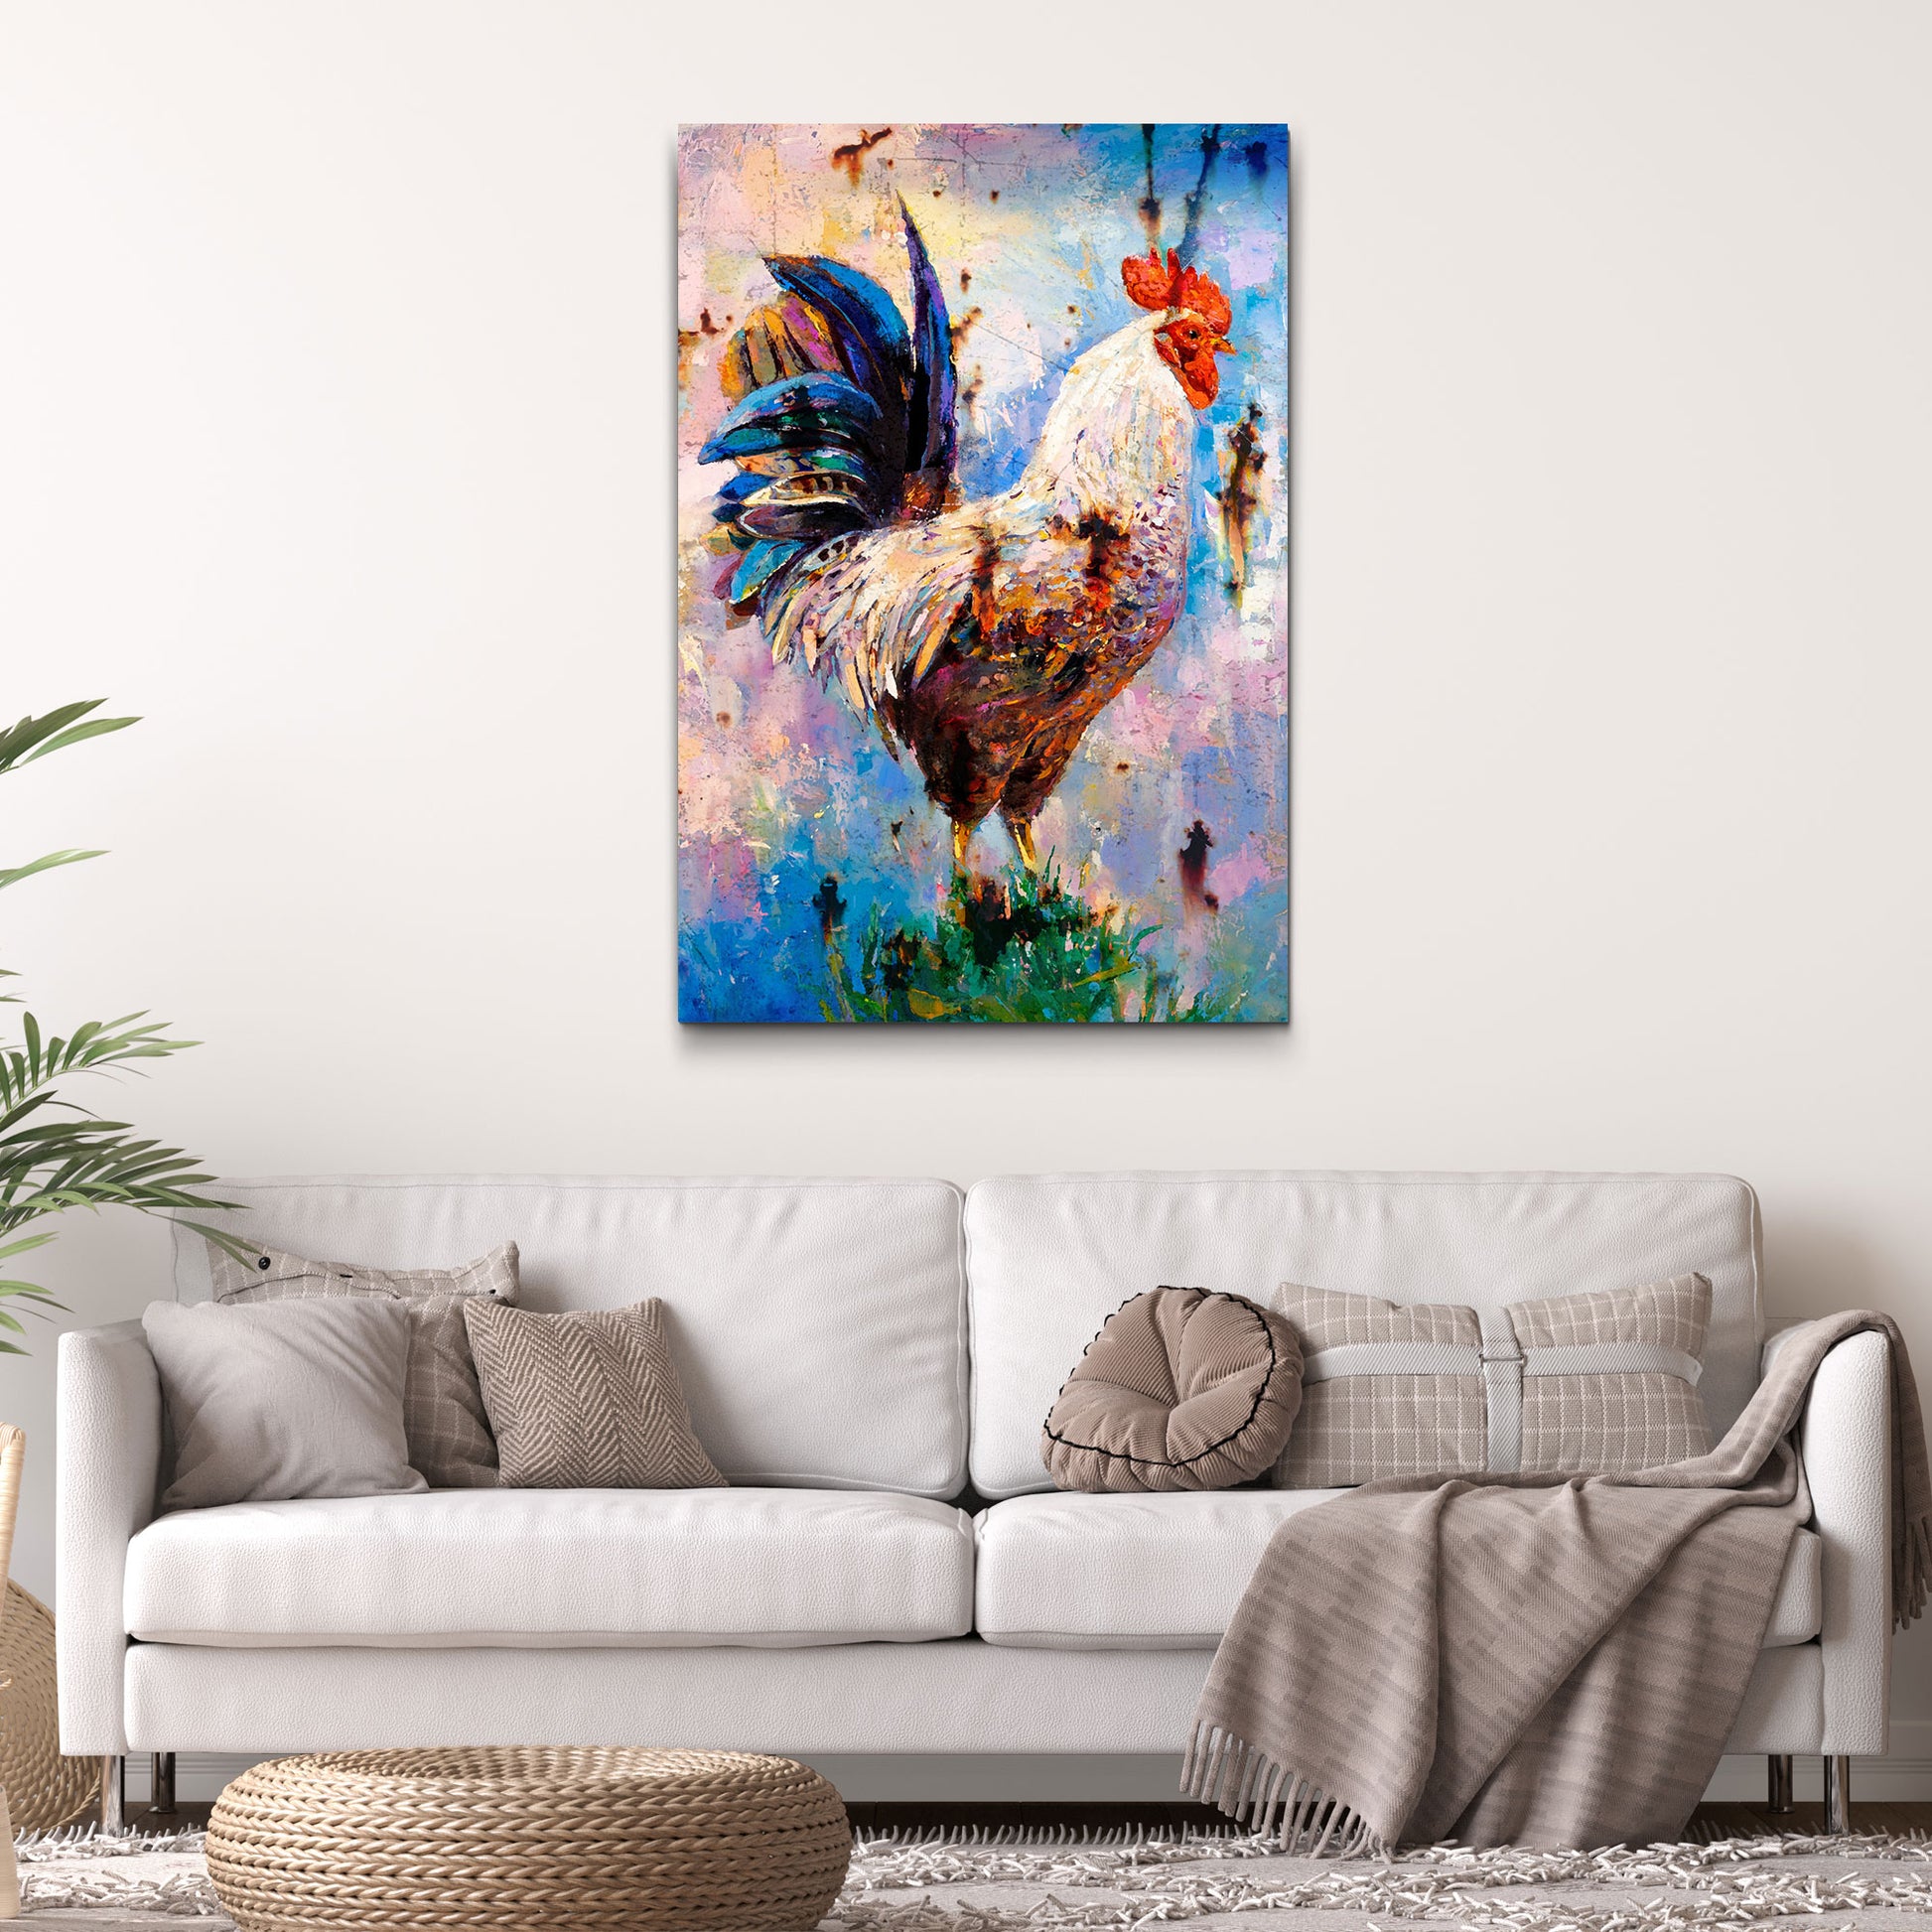 Rustic Country Chicken Canvas Wall Art Style 1 - Image by Tailored Canvases